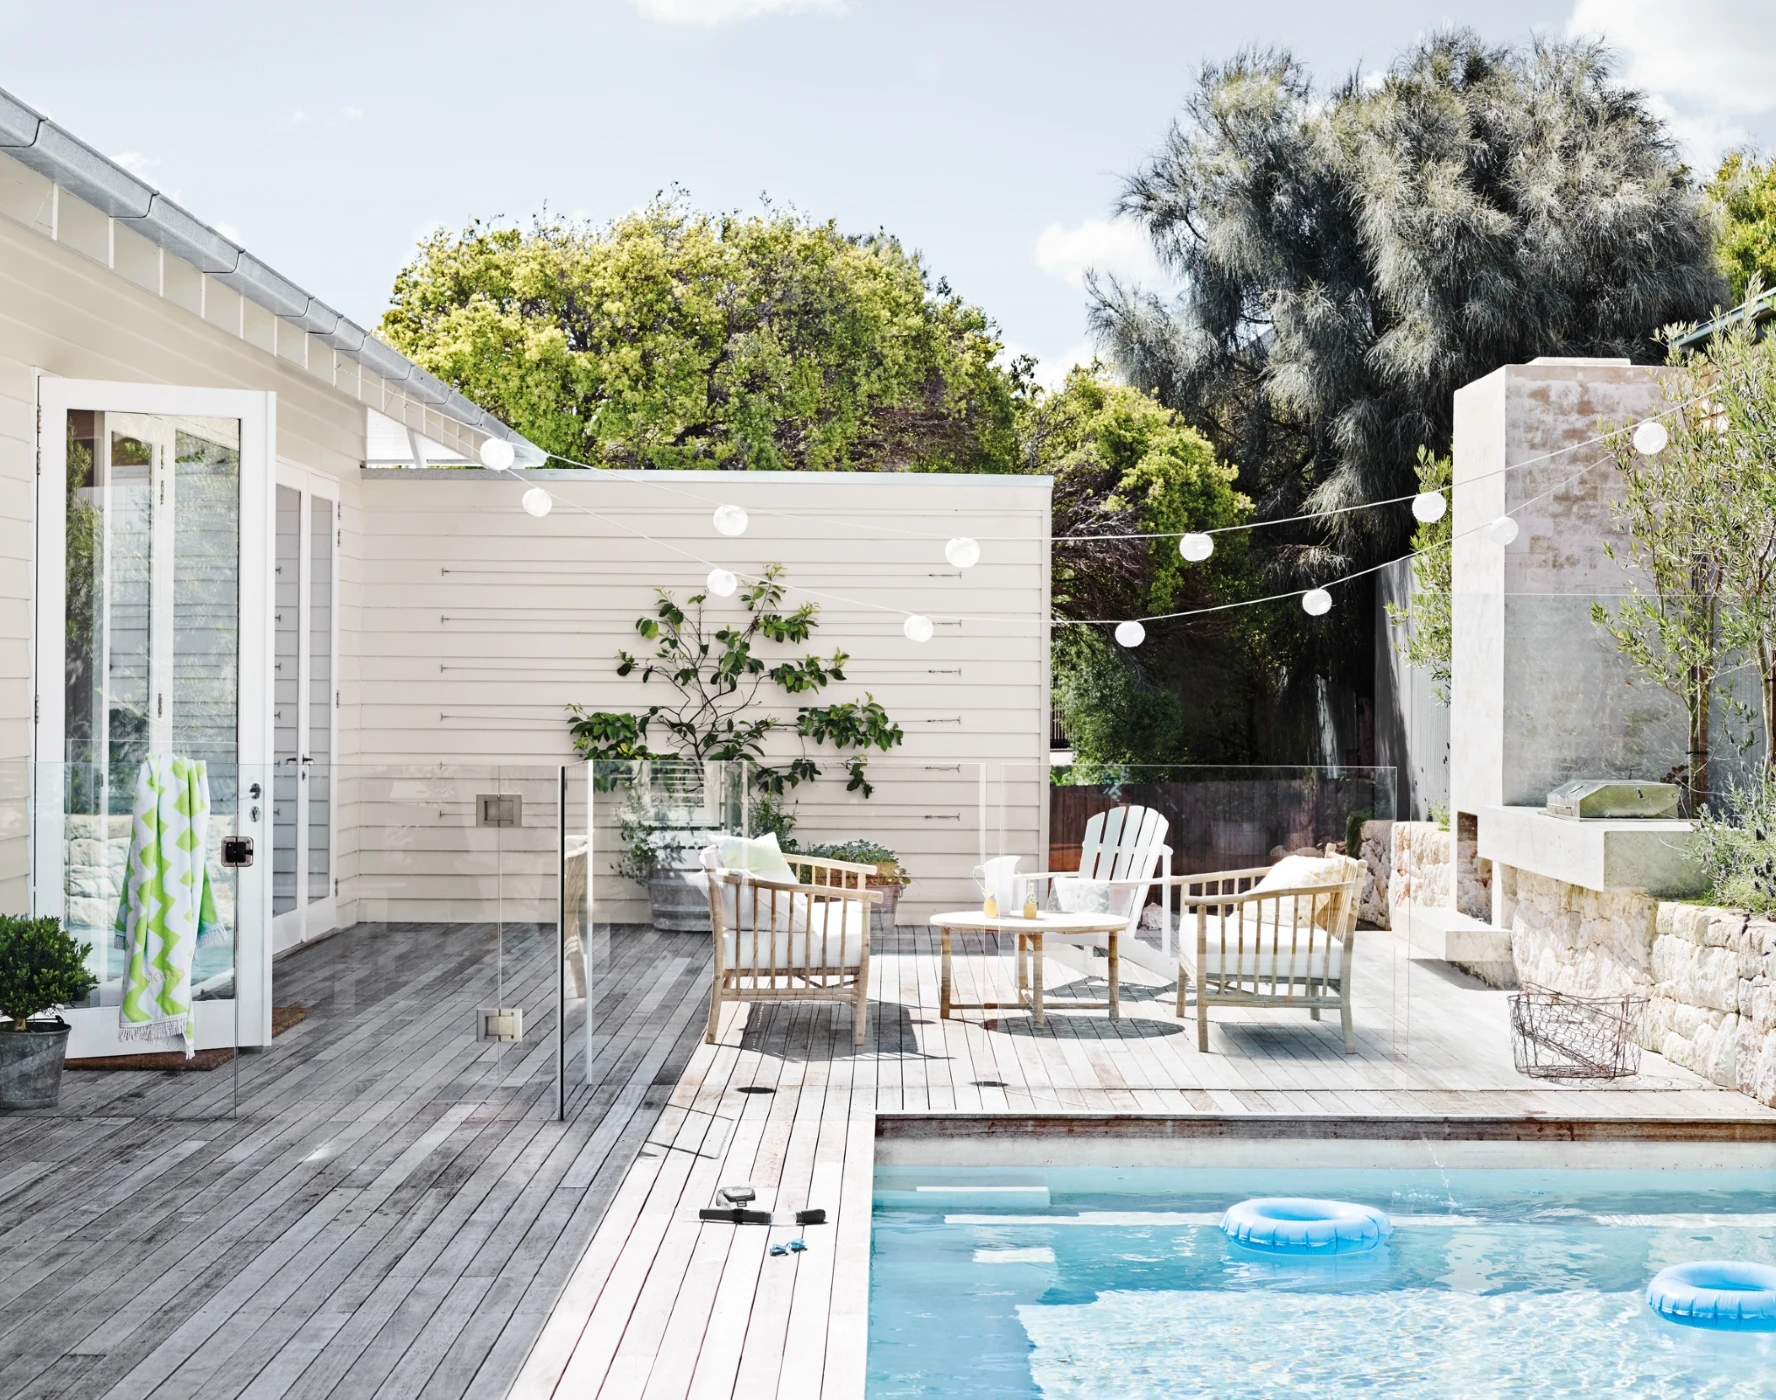 Outdoor area with white painted walls and a pool surrounded by a deck